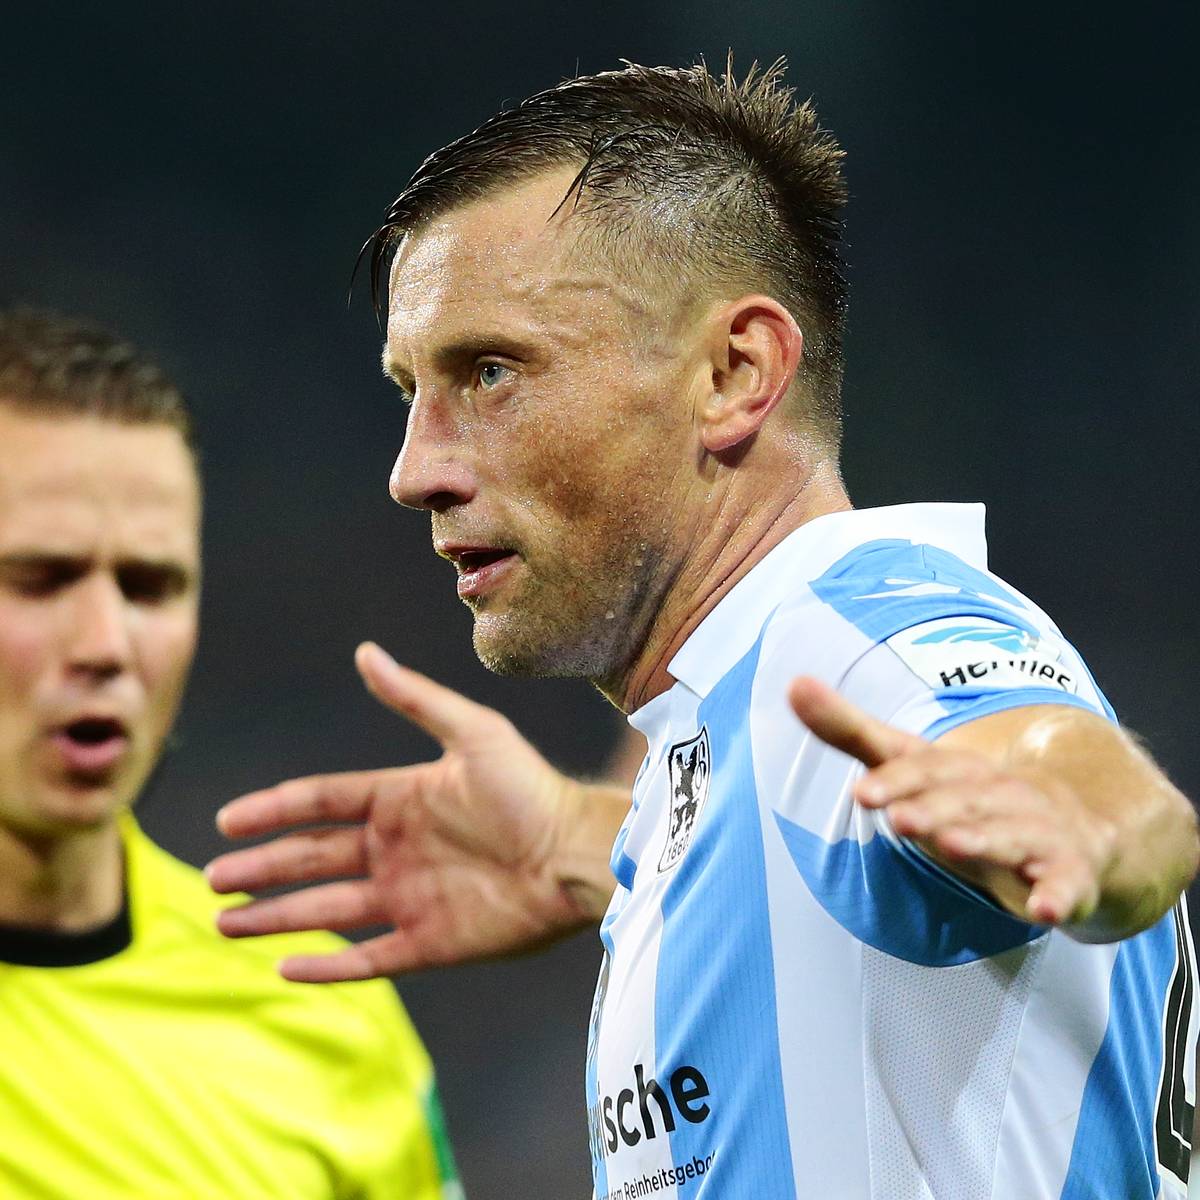 1860 Munich's Ivica Olic suspended fined by DFB for match betting - ESPN